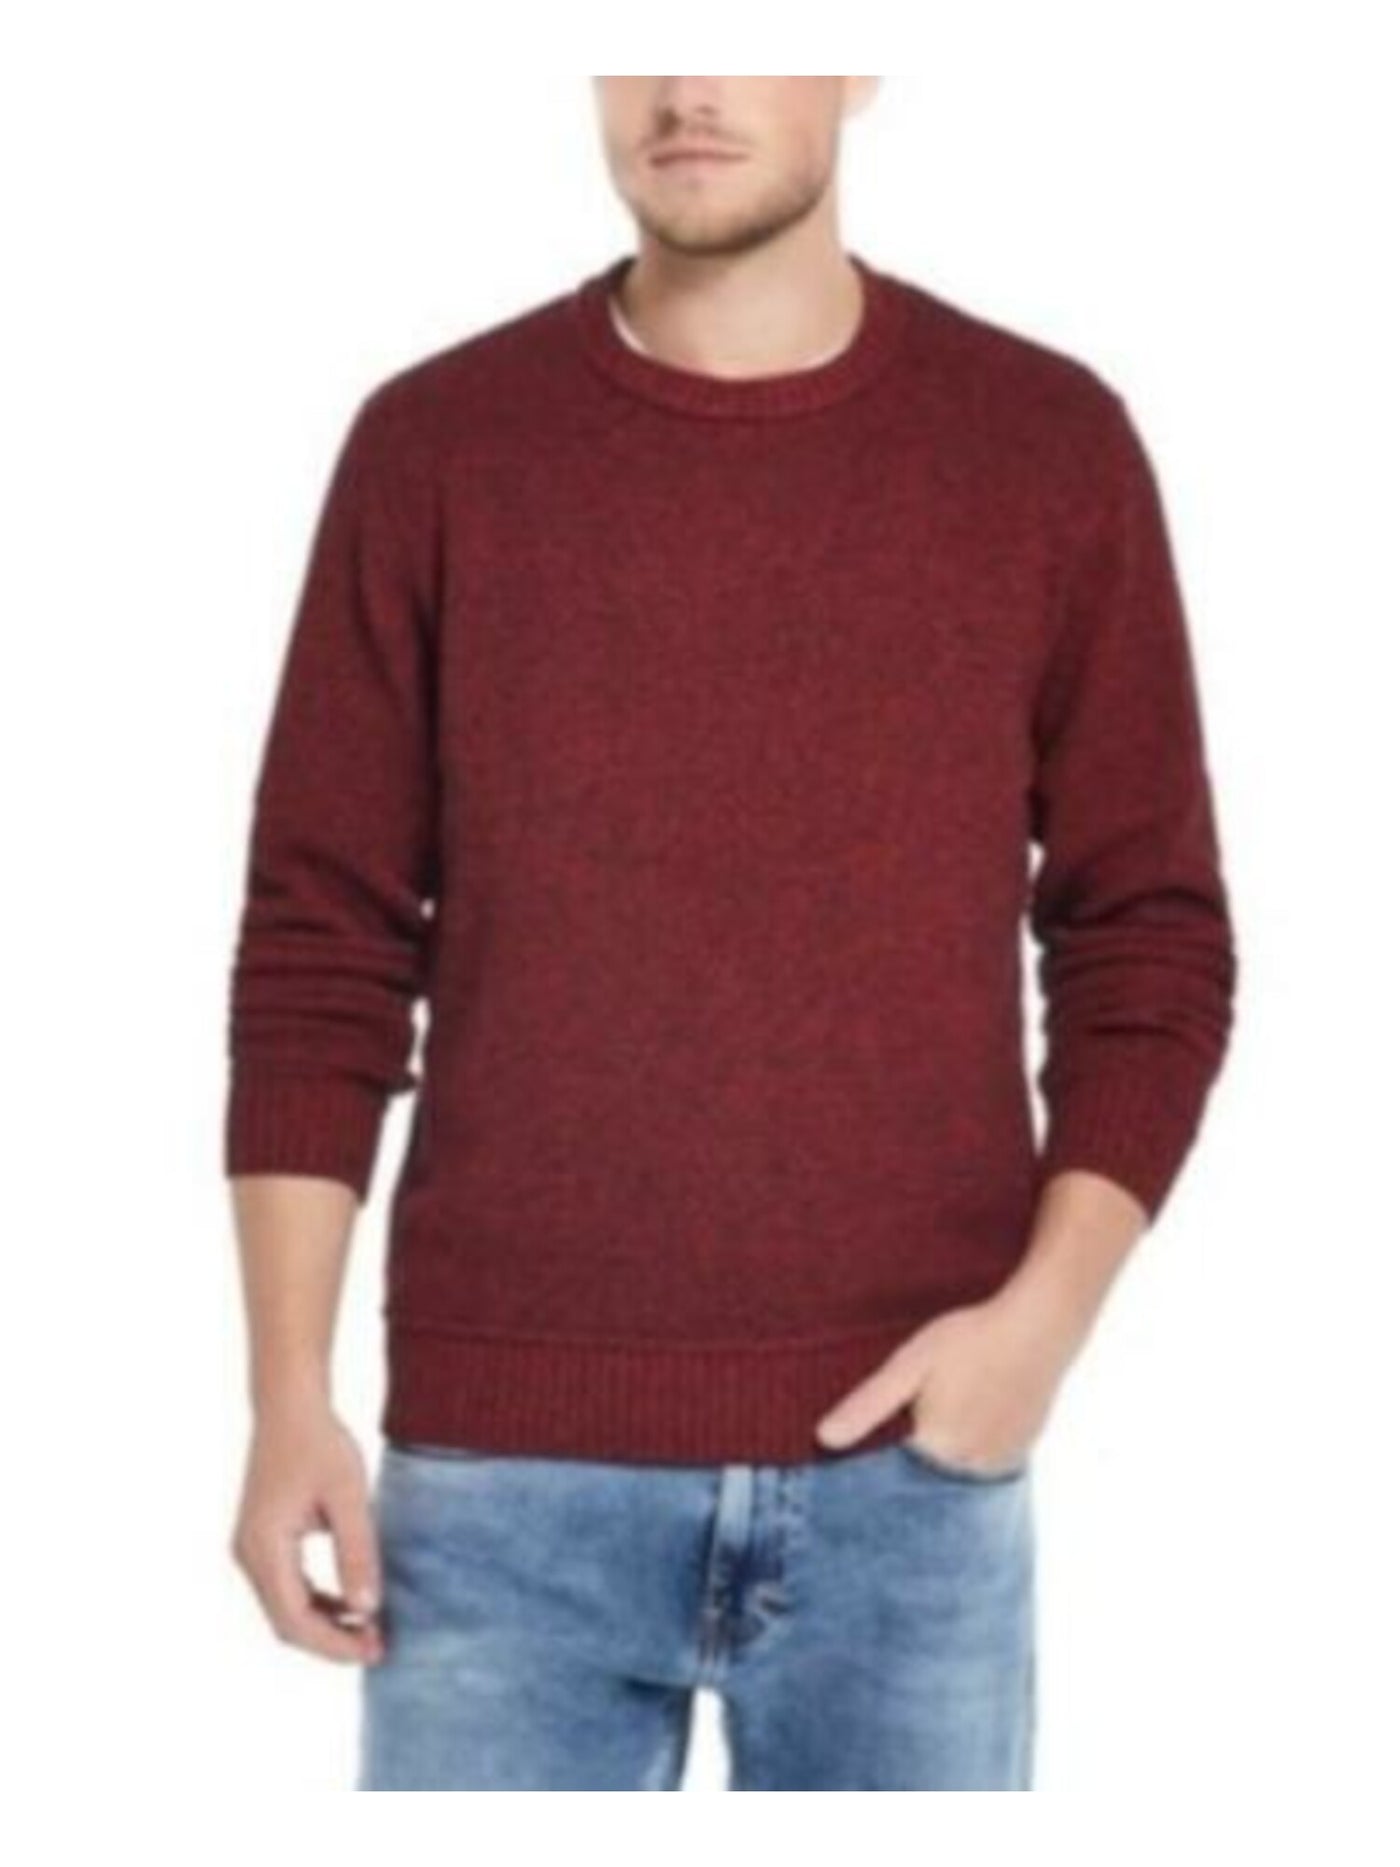 WEATHERPROOF VINTAGE Mens Red Heather Long Sleeve Crew Neck Classic Fit Knit Pullover Sweater XXL